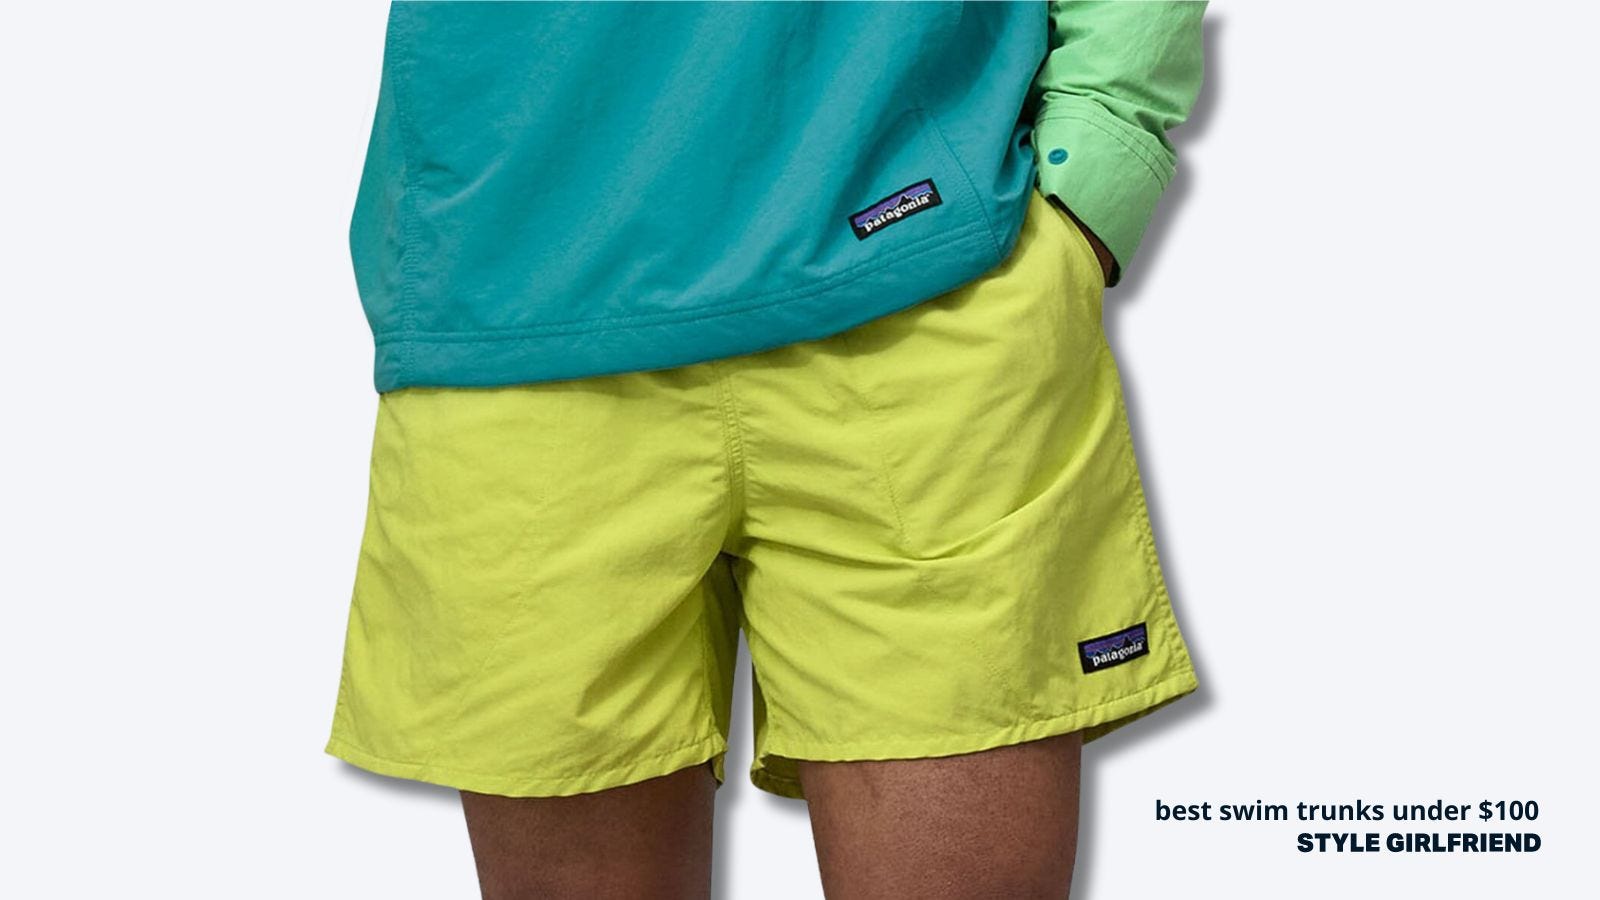 Close-up of neon yellow men's swim trunks paired with Patagonia green wool.The text on the screen reads: Best Swim Trunks Under $100, Stylish Girlfriend